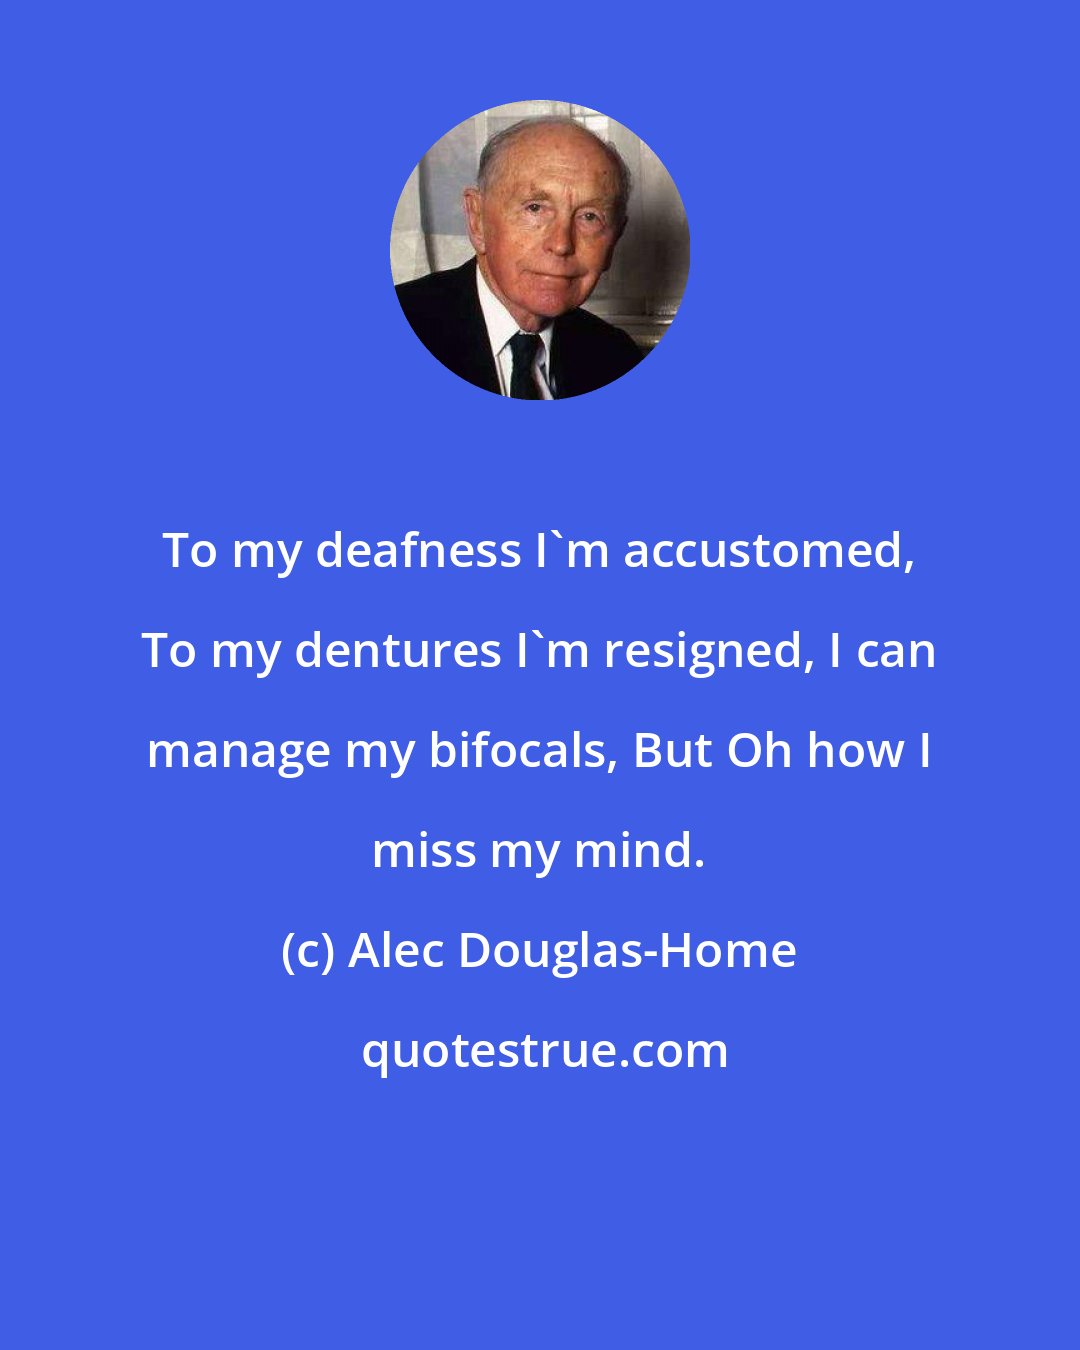 Alec Douglas-Home: To my deafness I'm accustomed, To my dentures I'm resigned, I can manage my bifocals, But Oh how I miss my mind.